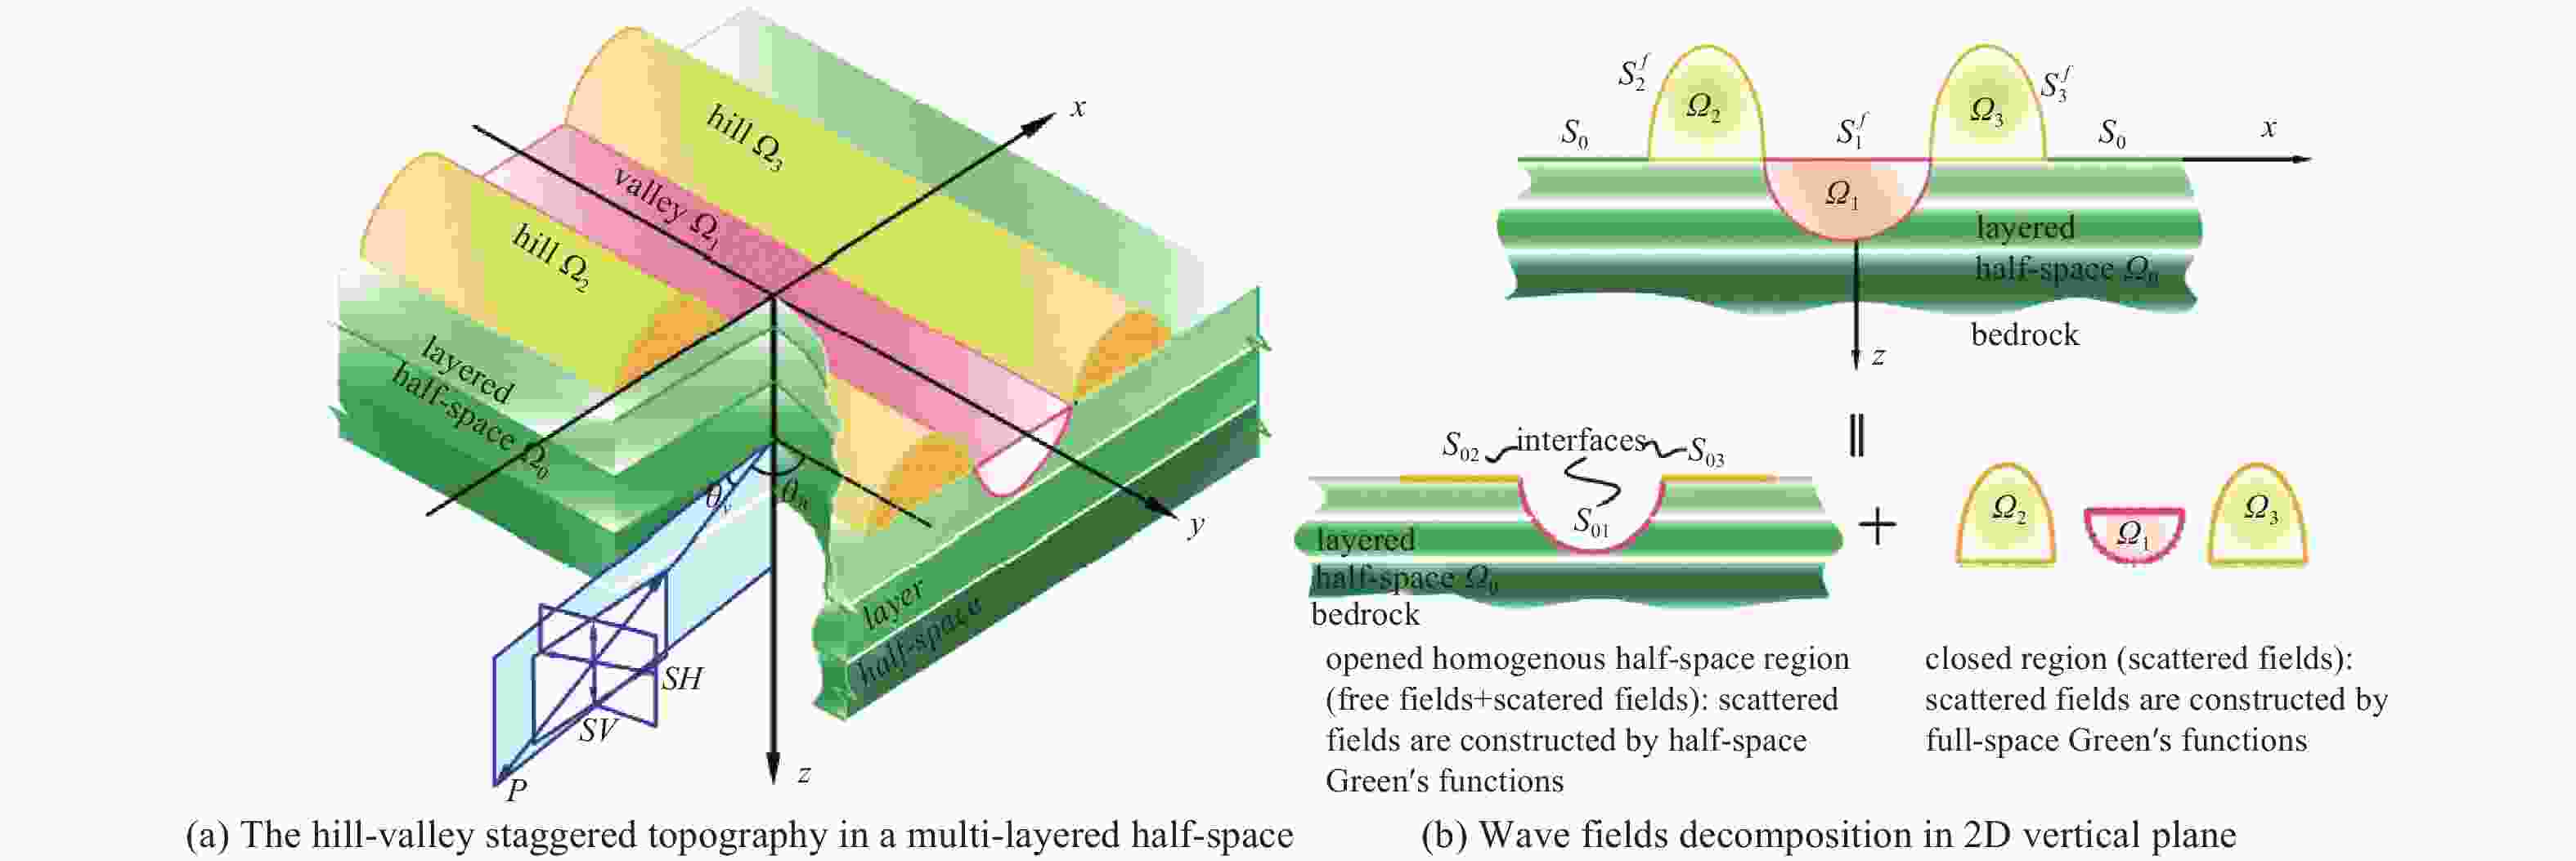 3D seismic response of a 2D hill-valley staggered topography 